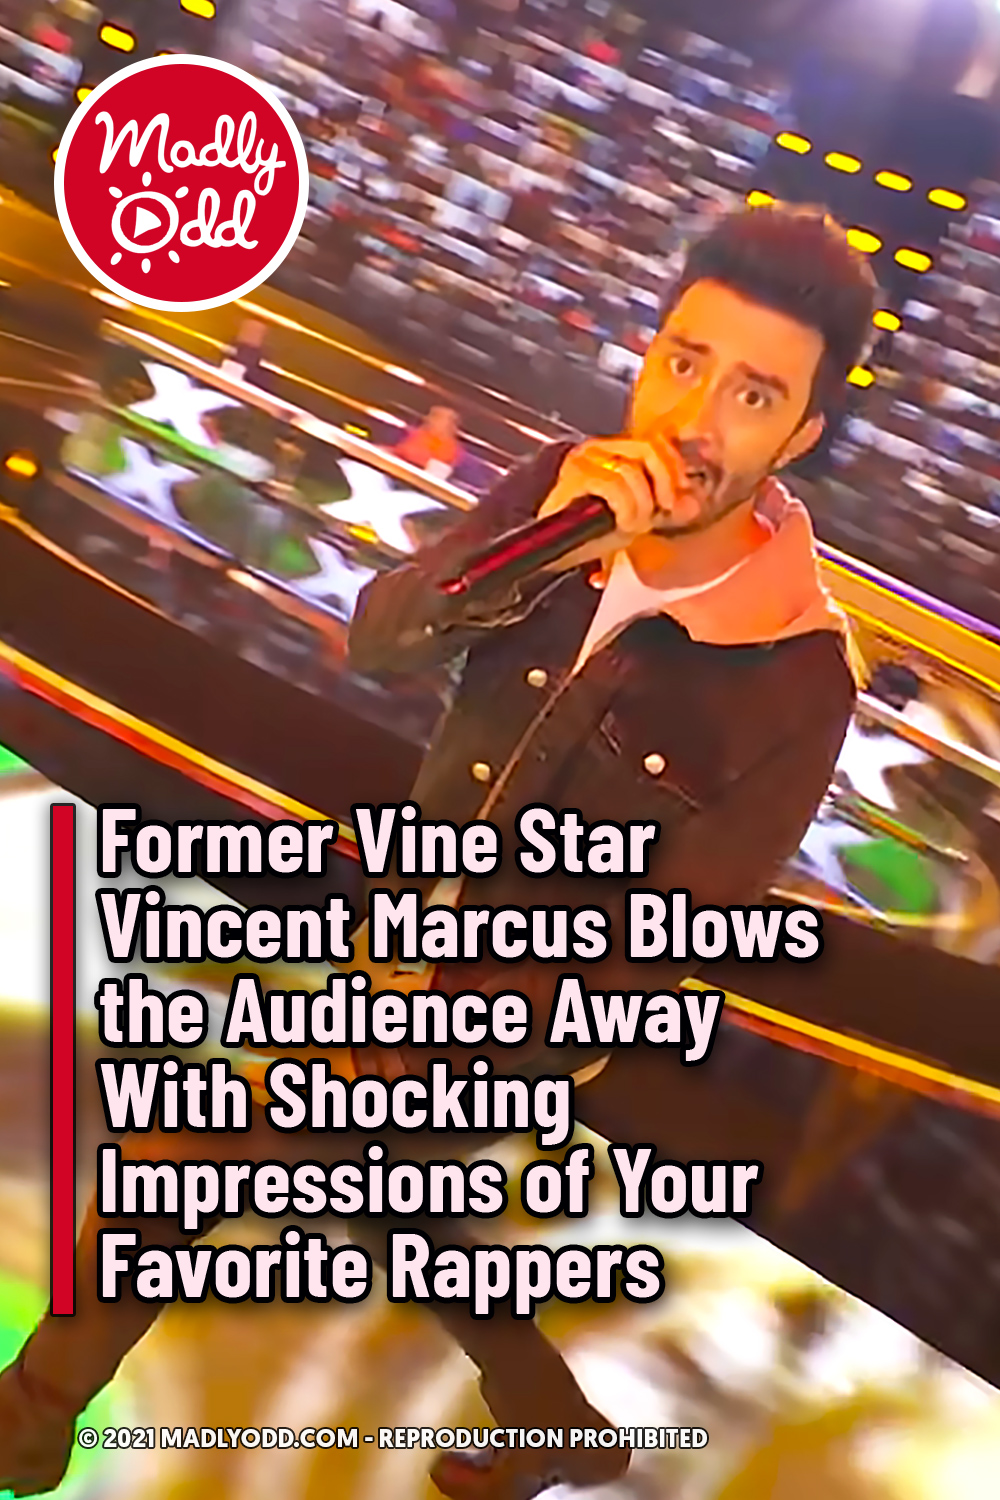 Former Vine Star Vincent Marcus Blows the Audience Away With Shocking Impressions of Your Favorite Rappers